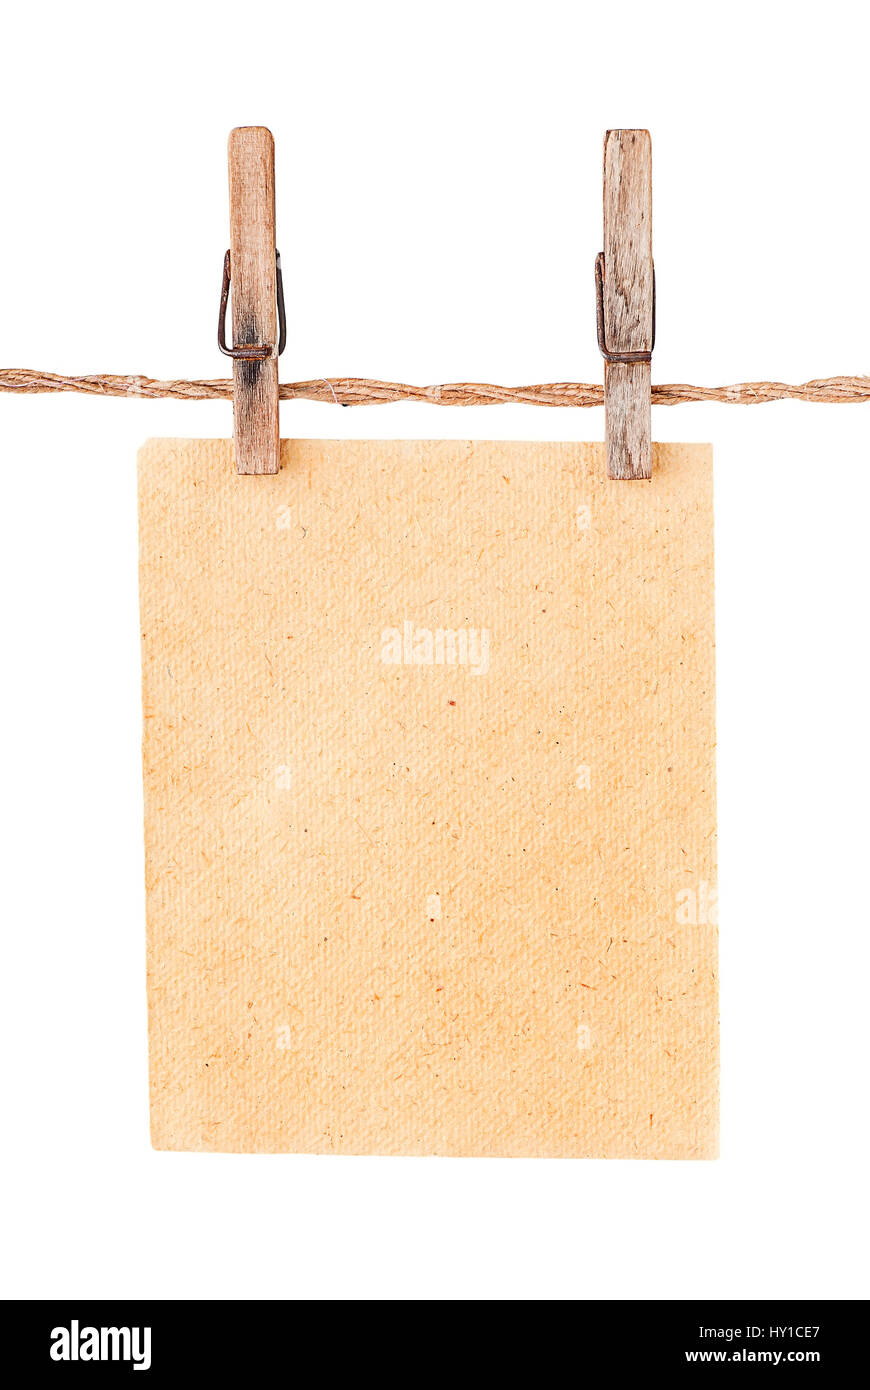 Piece old sheet of paper on two clothespins isolated on white background Stock Photo